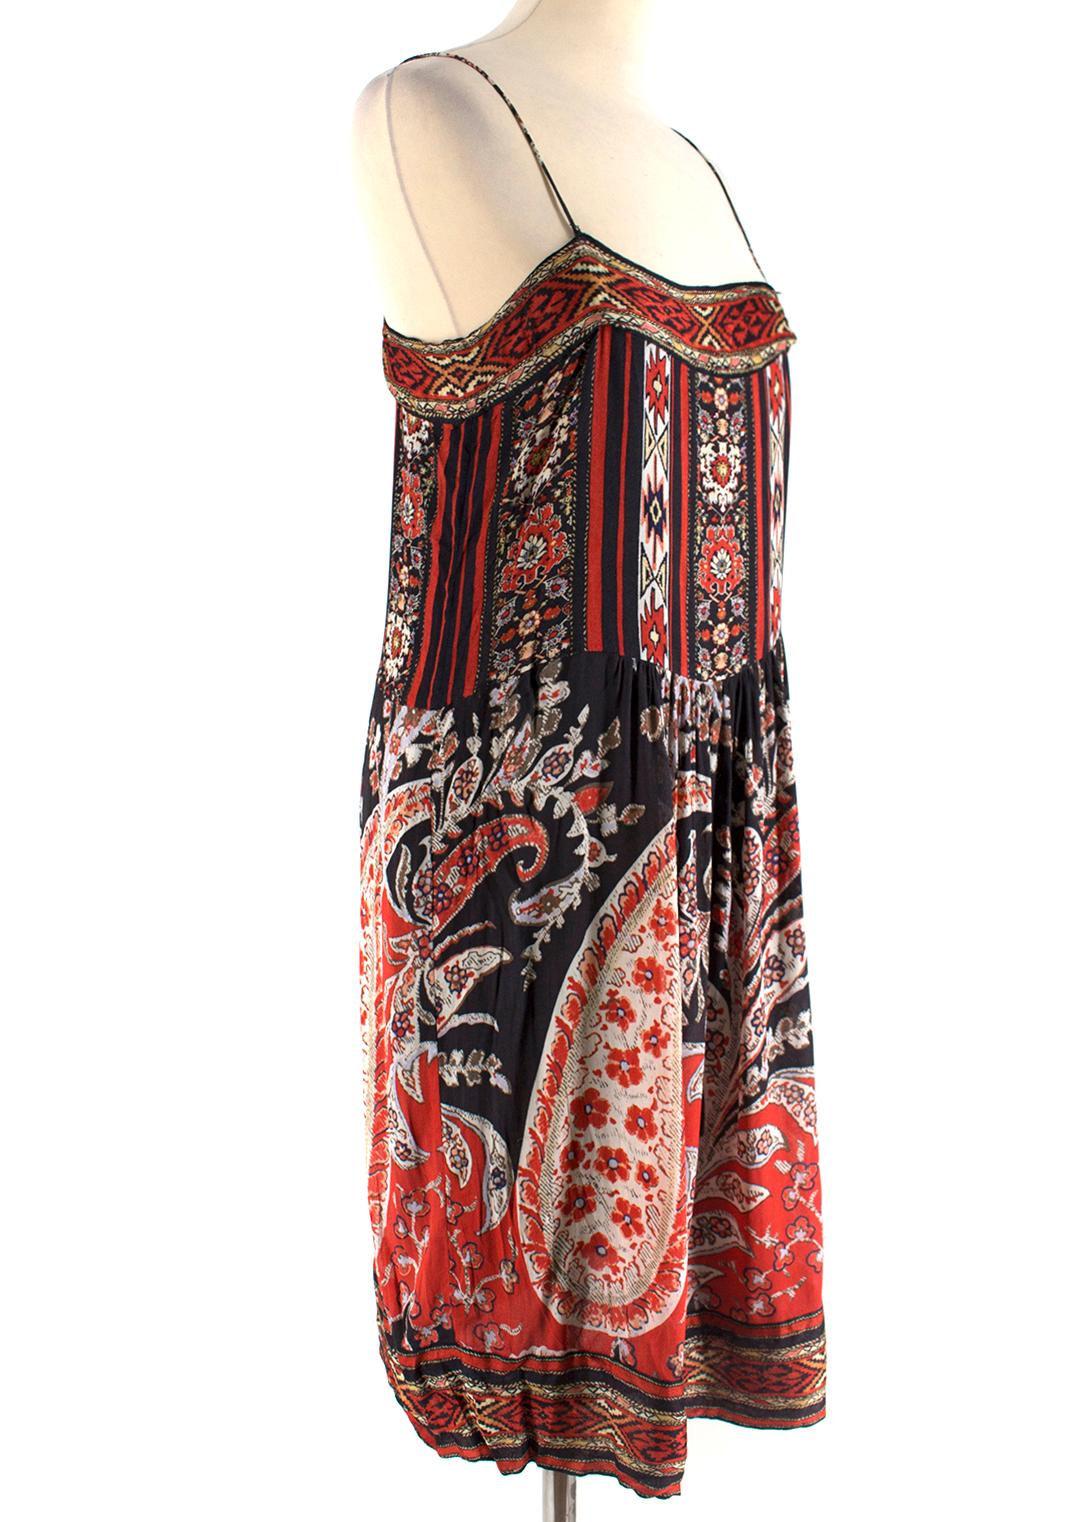 Isabel Marant Etoile Red Paisley Print Dress

- Red Paisley Print Dress
- Strapped bandeau neckline
- Spaghetti straps
- Slightly gathered at waist, flowy skirt 
- Fully lined 

Please note, these items are pre-owned and may show some signs of